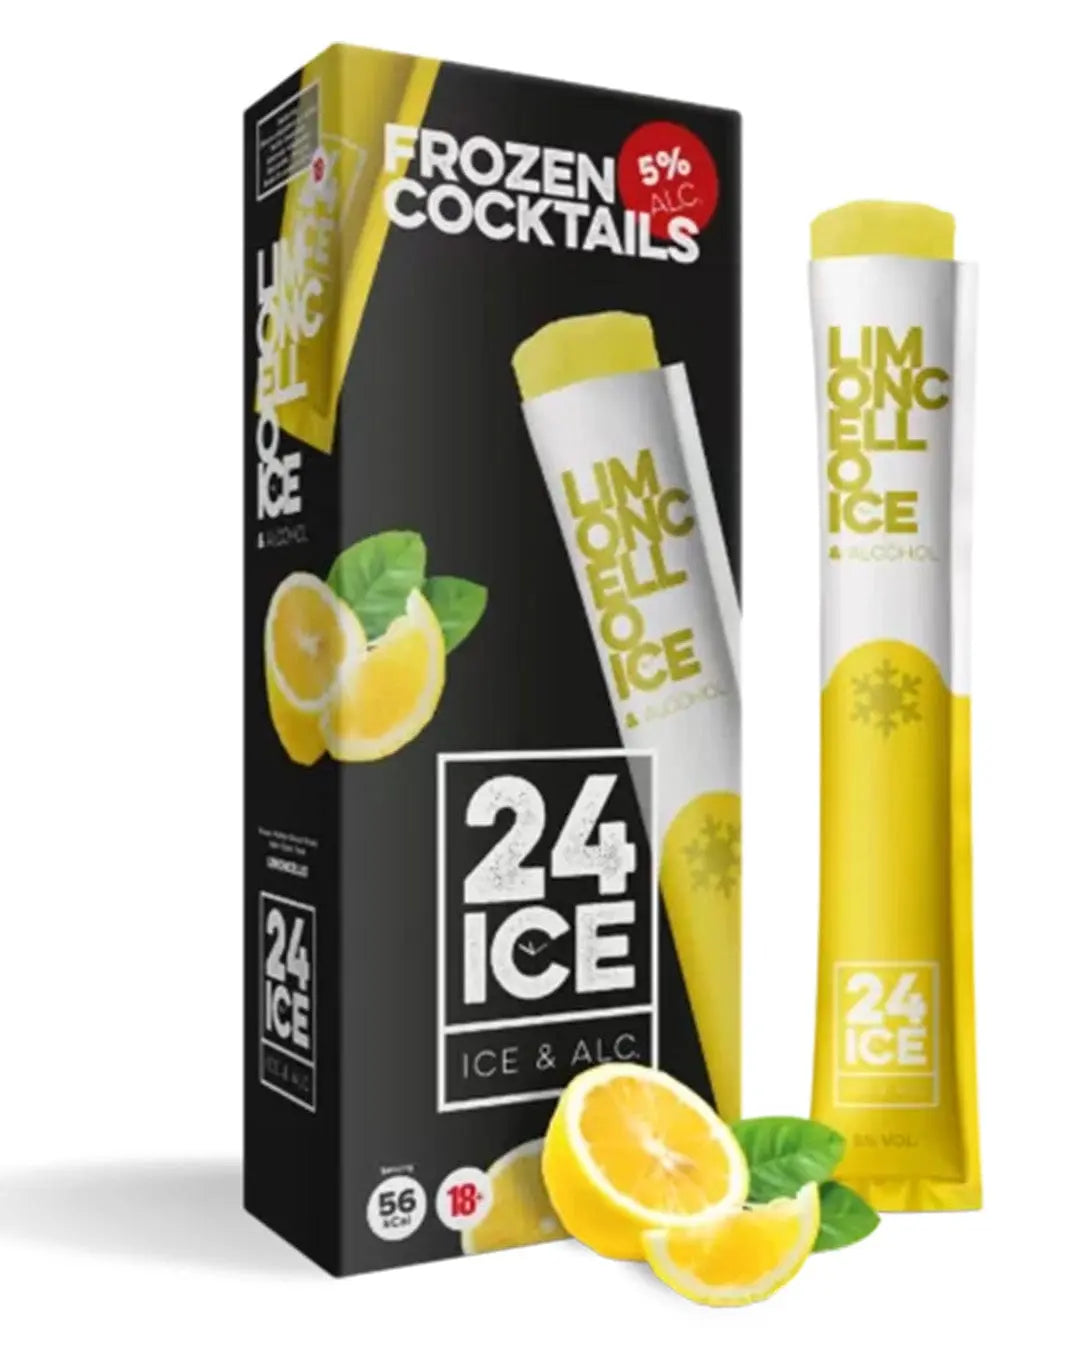 24 Ice Limoncello Frozen Premixed Cocktail Multipack, 5 x 65 ml Ready Made Cocktails